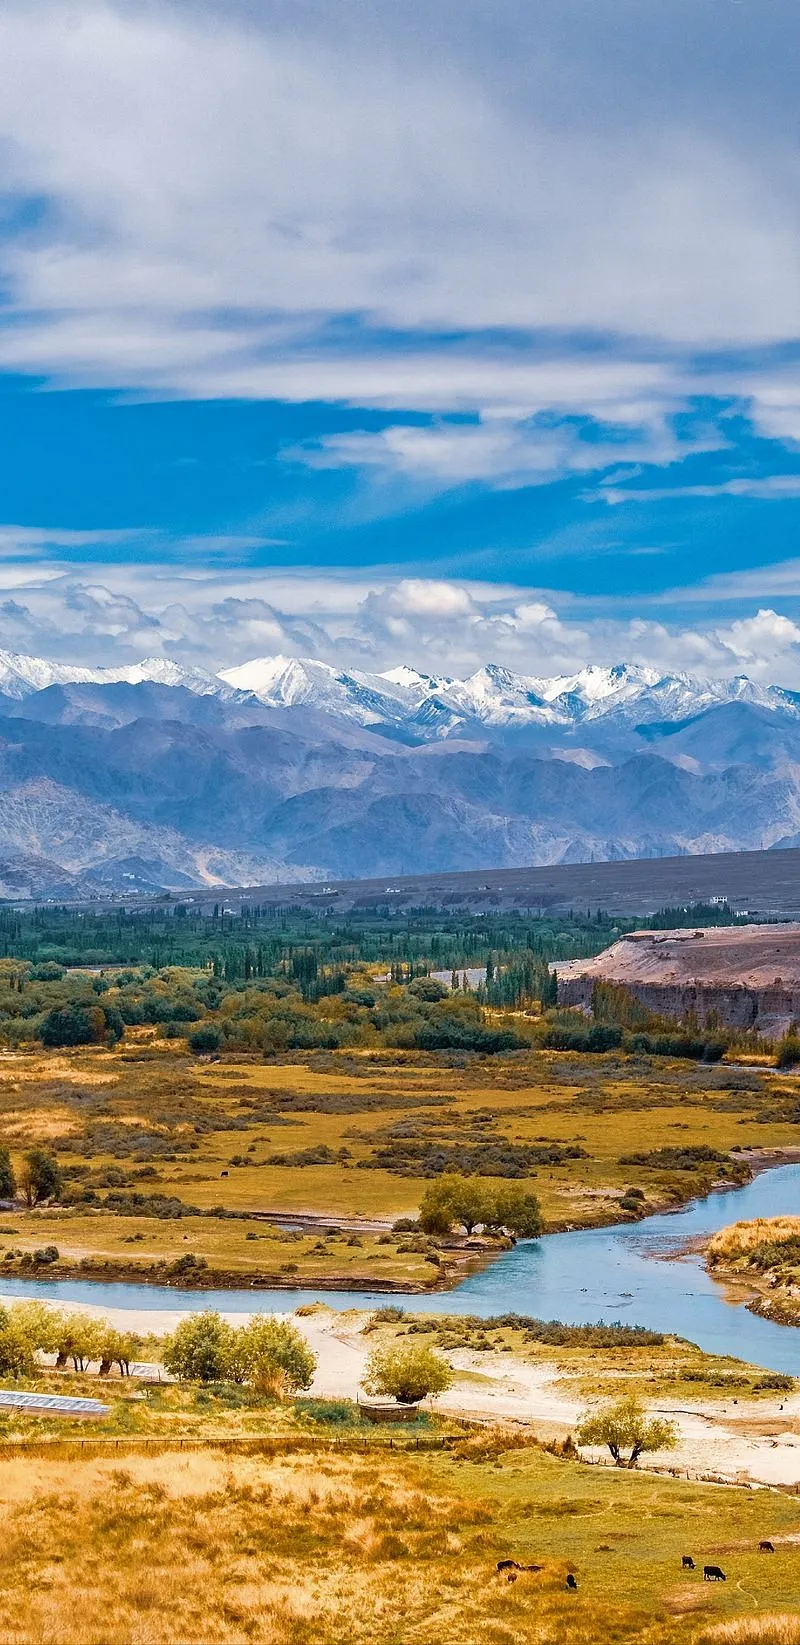 Snow capped mountain view in Ladakh, photograph by Rohit Dhiman